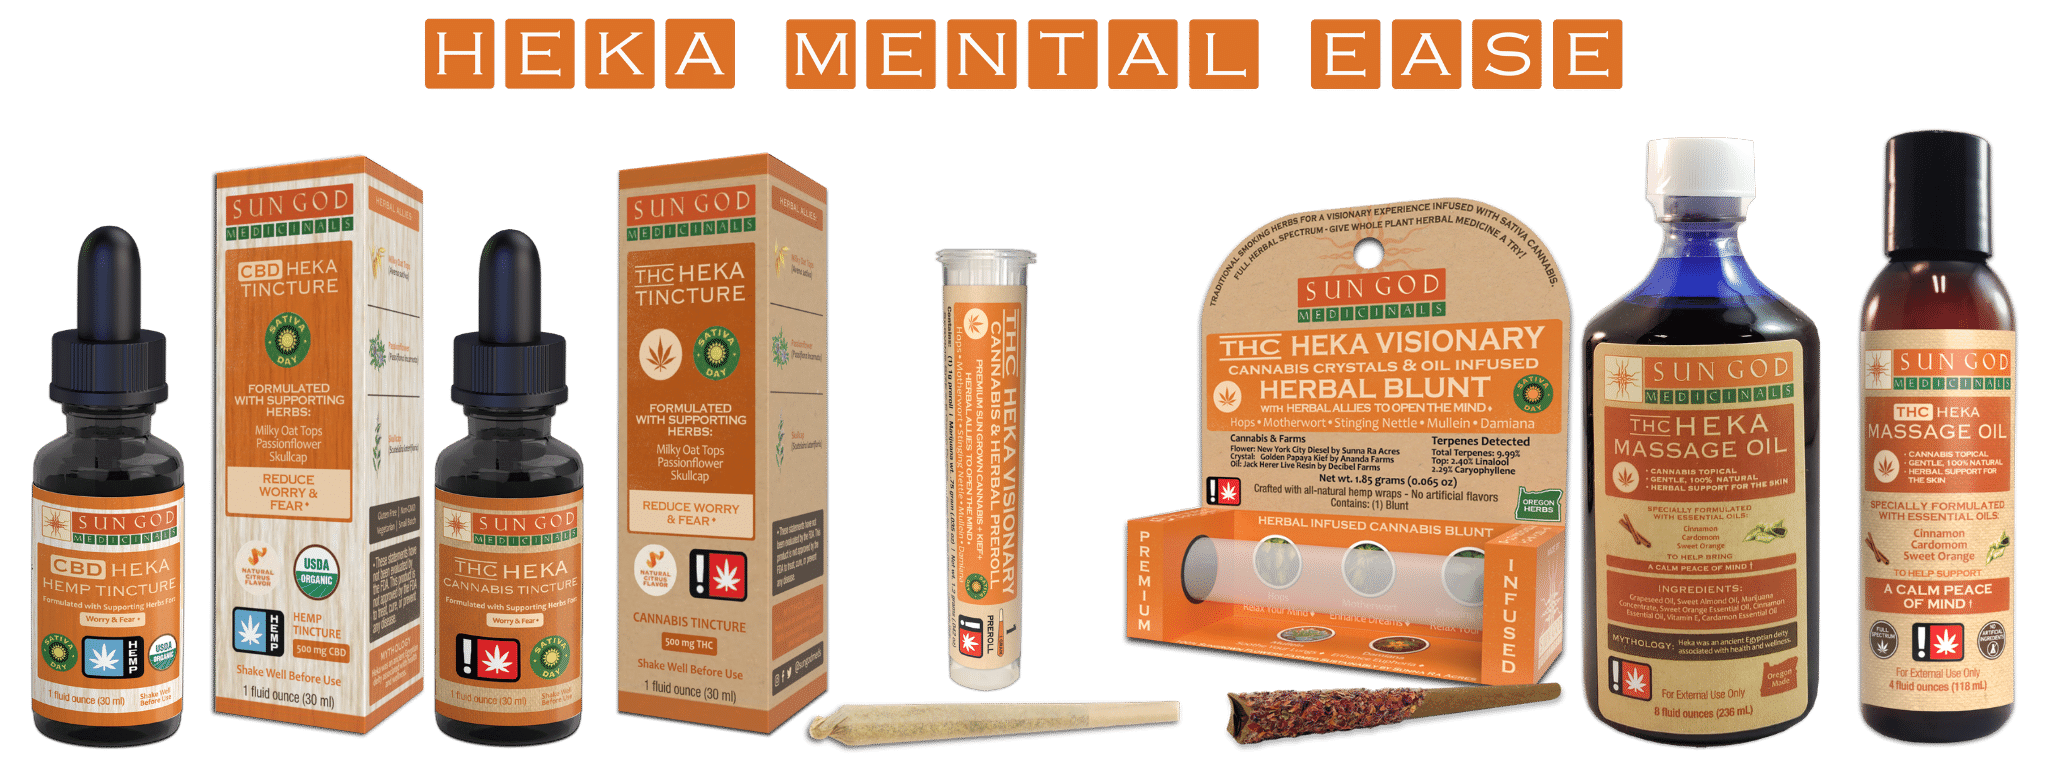 Herbal Products For Mental Ease and Mood Support - by Sun God Medicinals